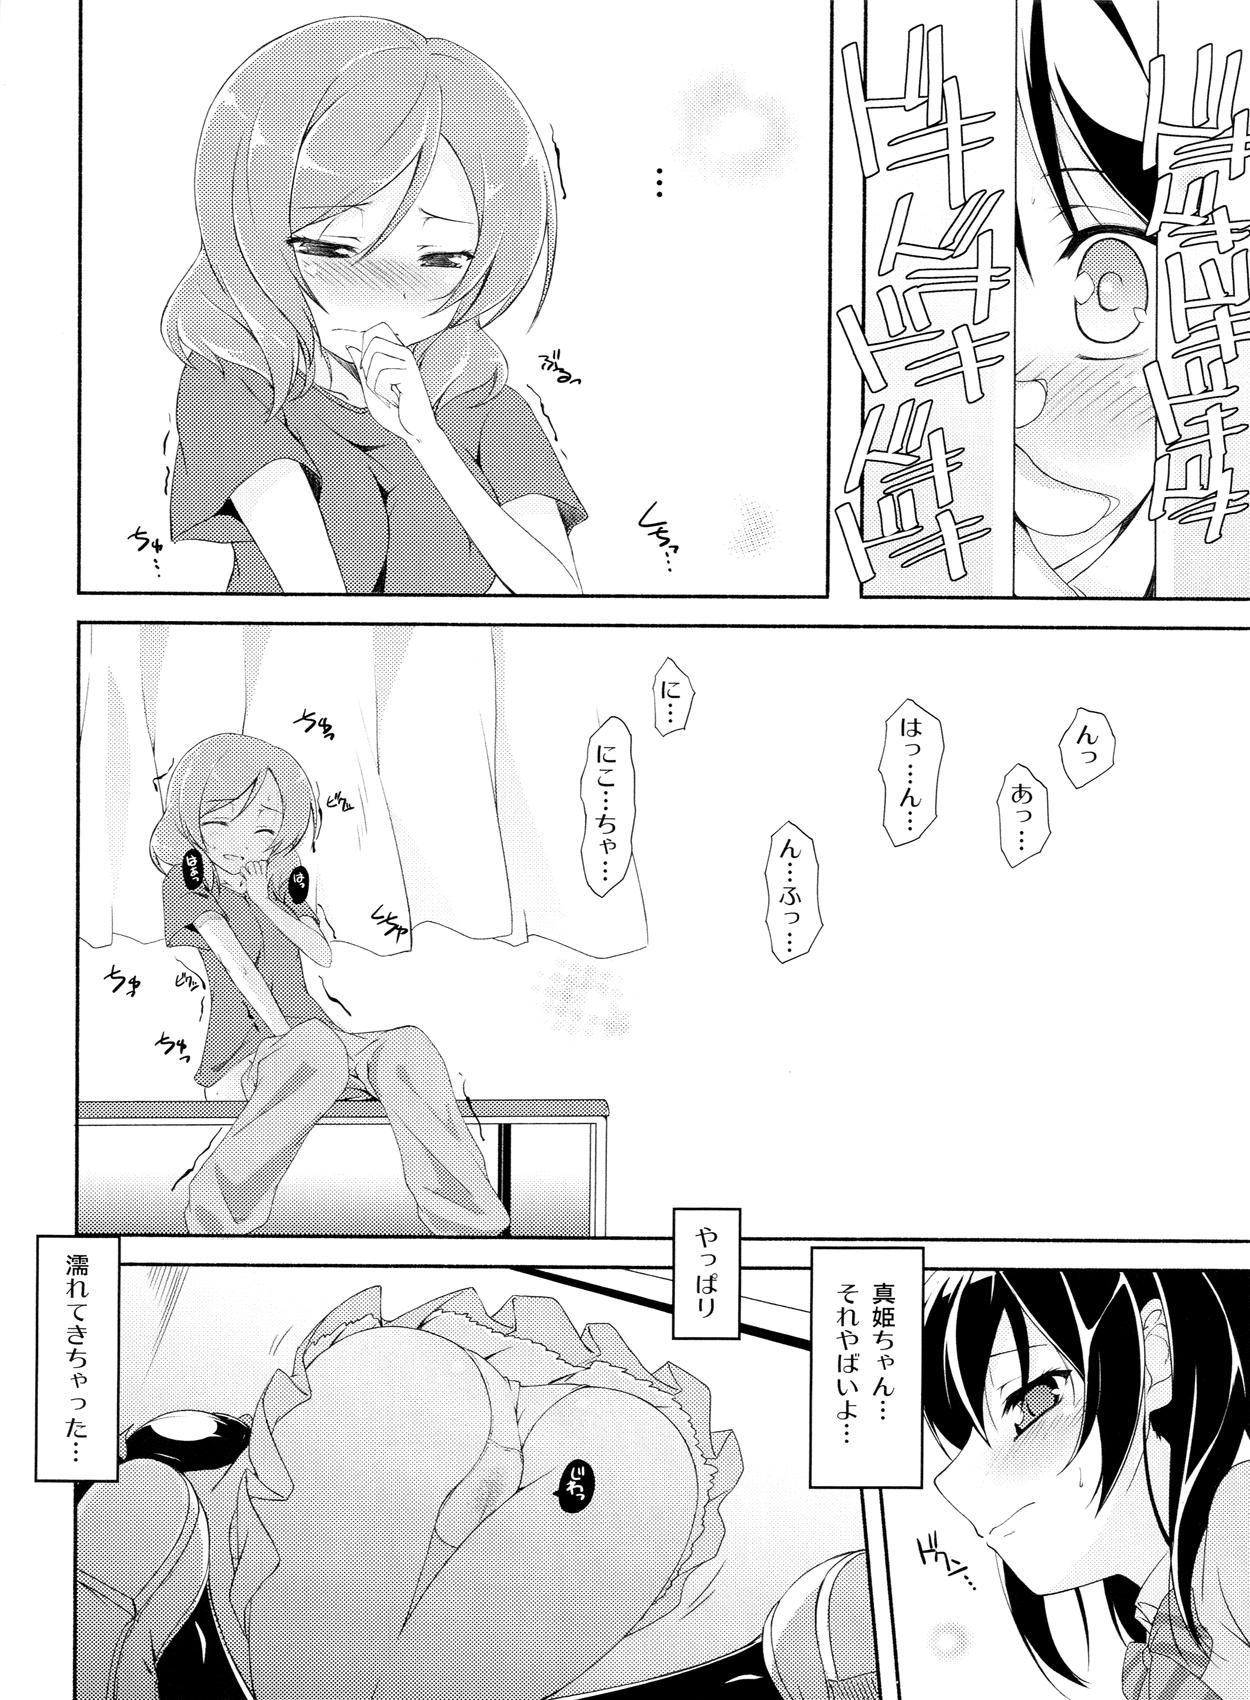 Freaky Love White - Love live Blow Job Contest - Page 5